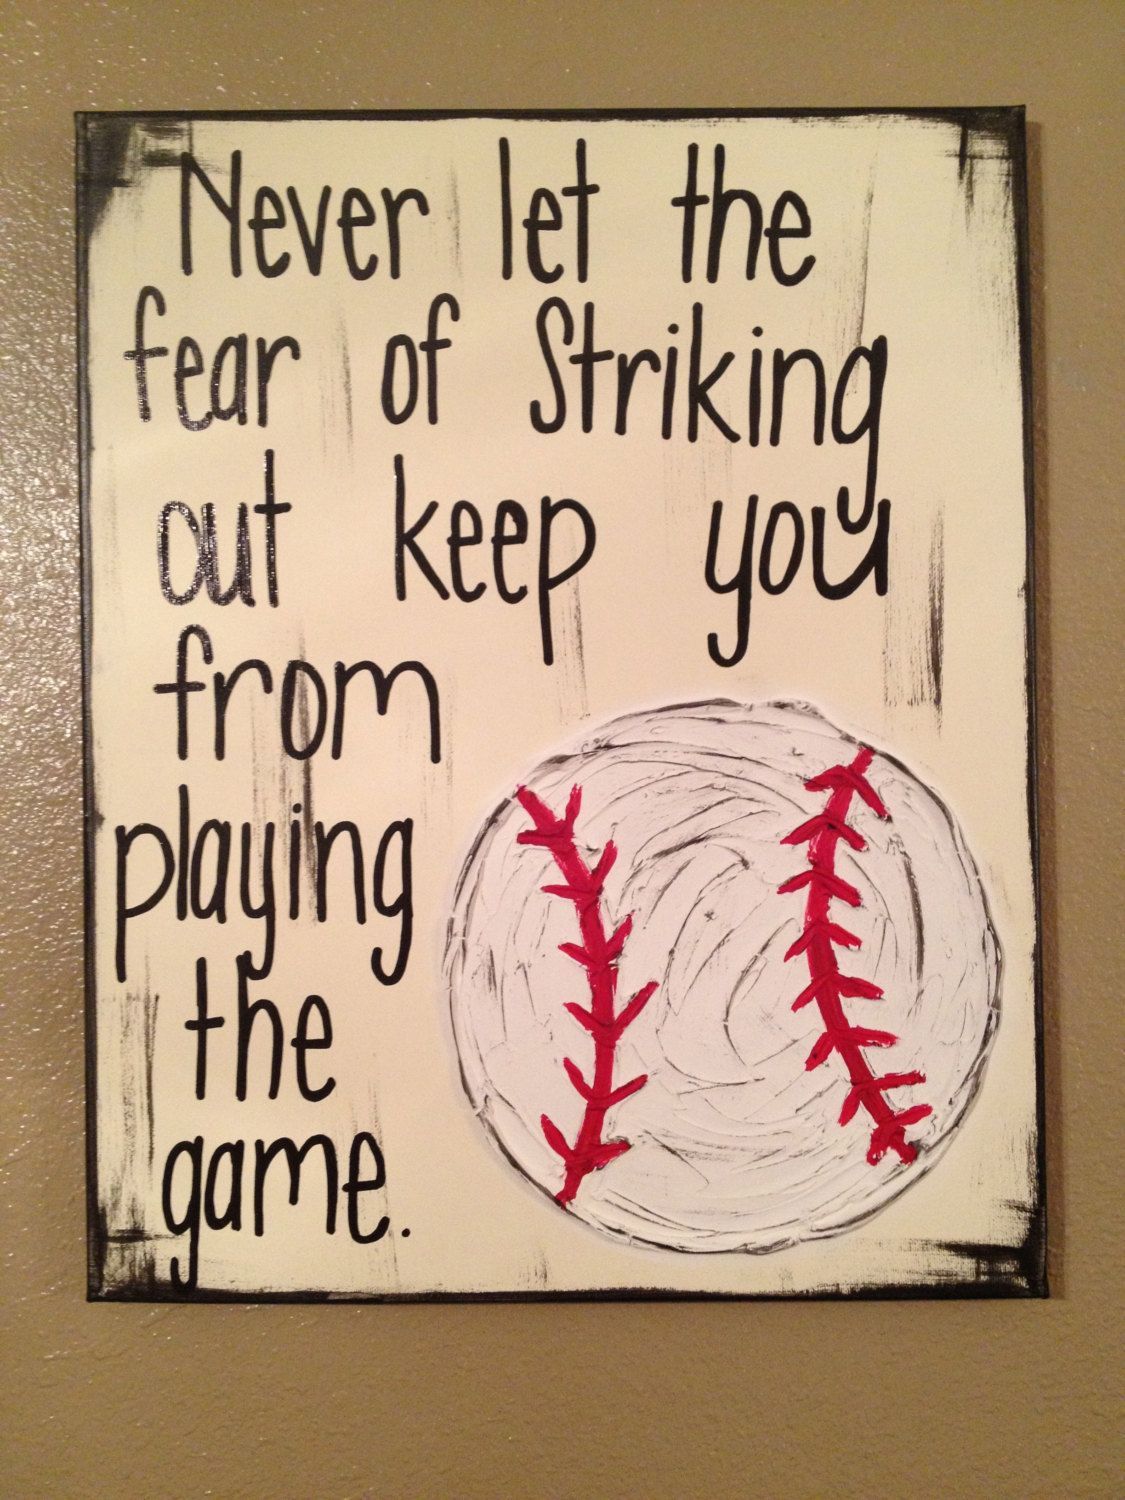 Great Baseball Quote Wall Art.  Check out “Classy Canvas” on Etsy.  Also, nice quote to decorate a tag for the teams snack bag.